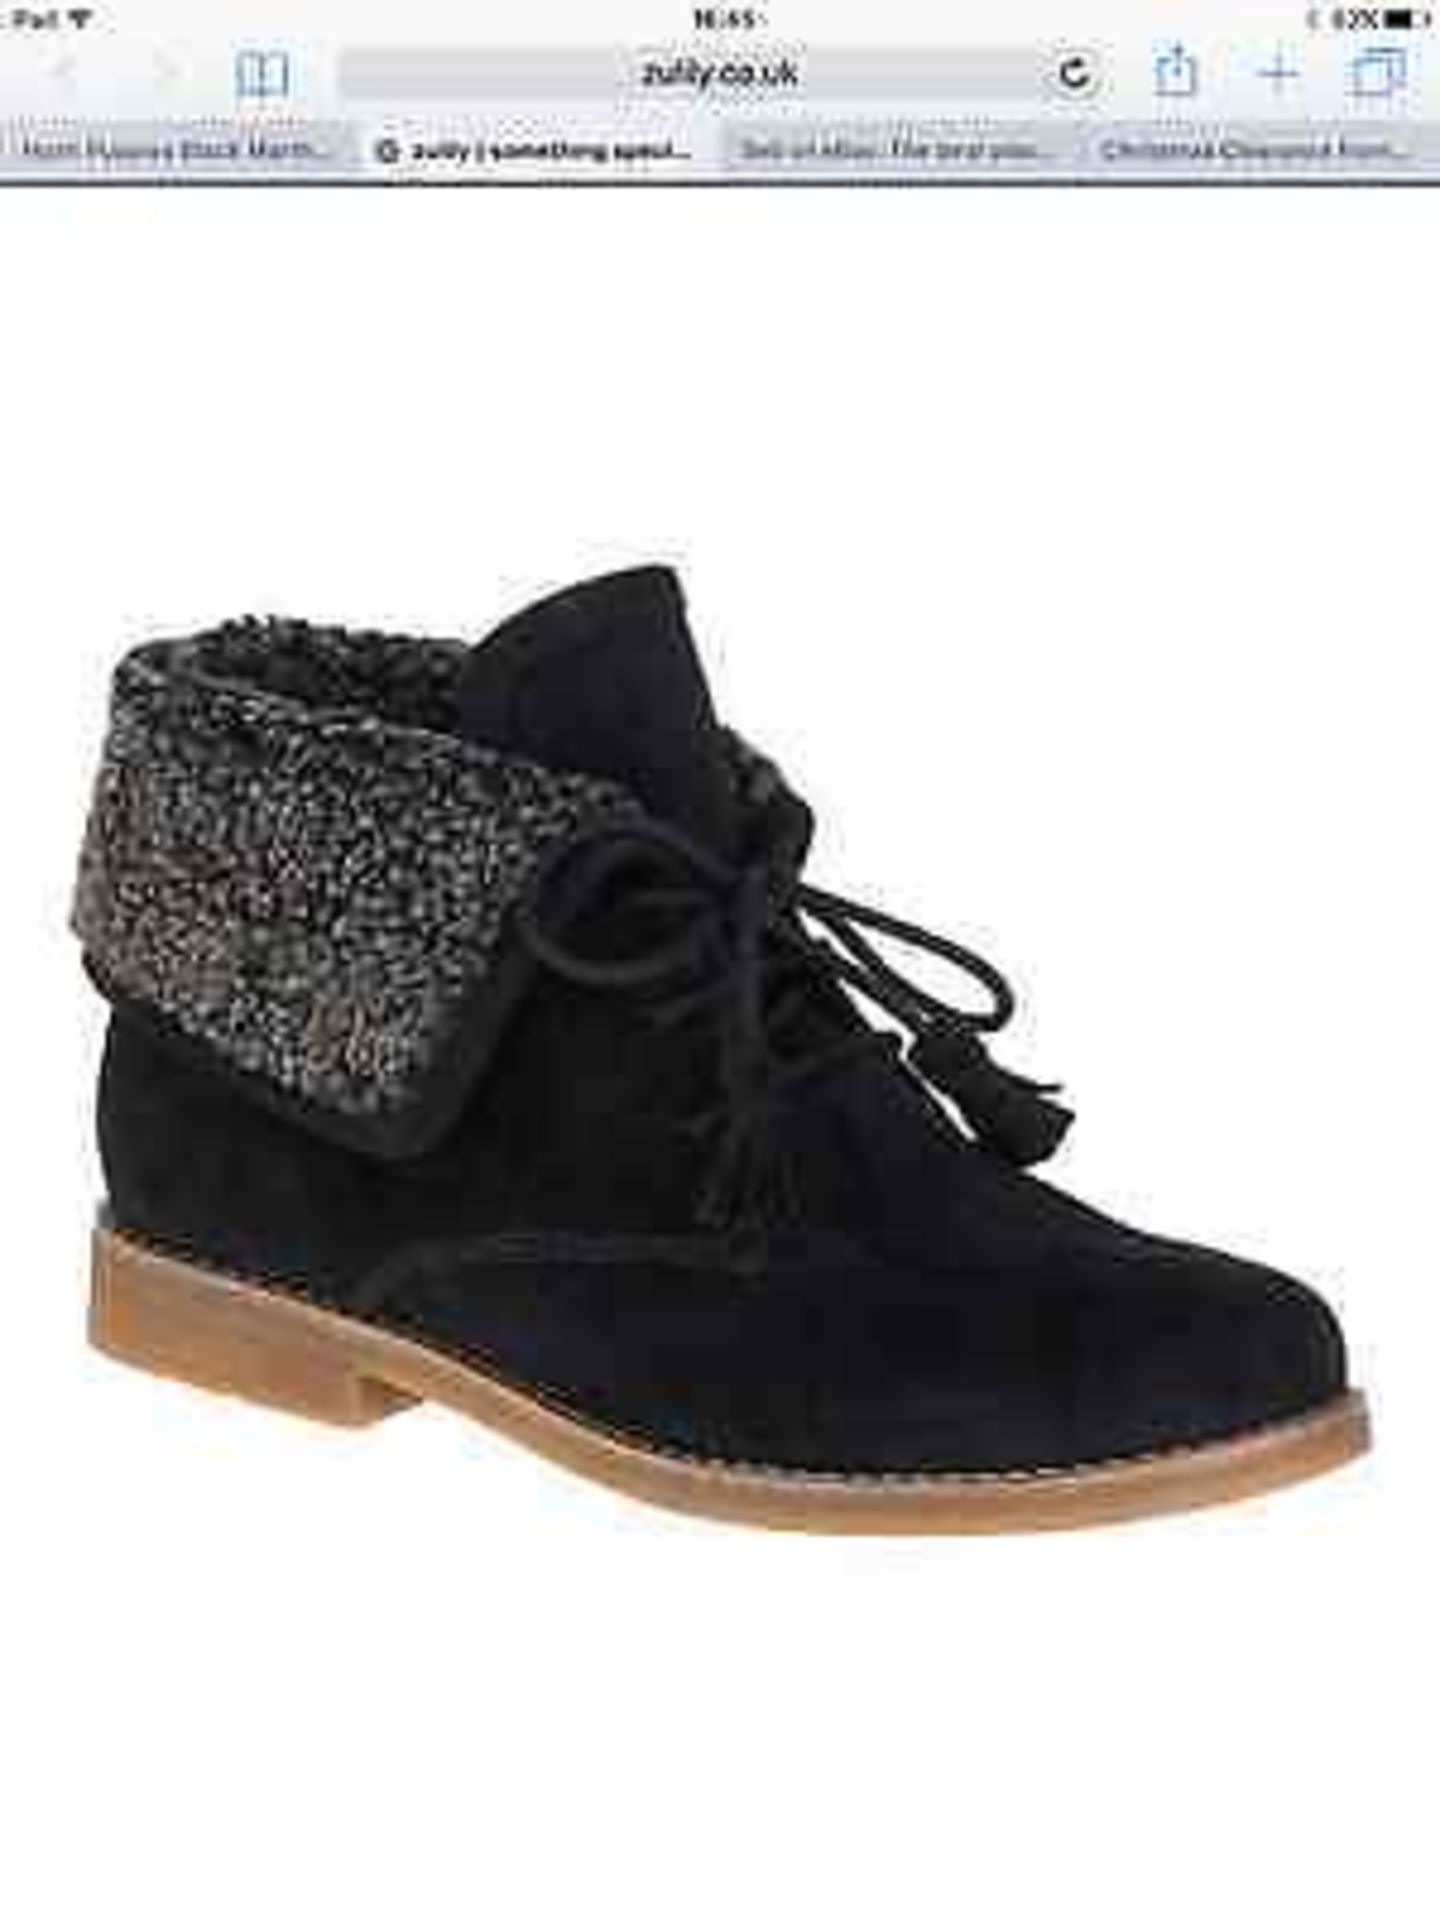 Hush Puppies Black Suede Martha Cayto Ankle Boot, Size UK 7, RRP £100 (New with box)